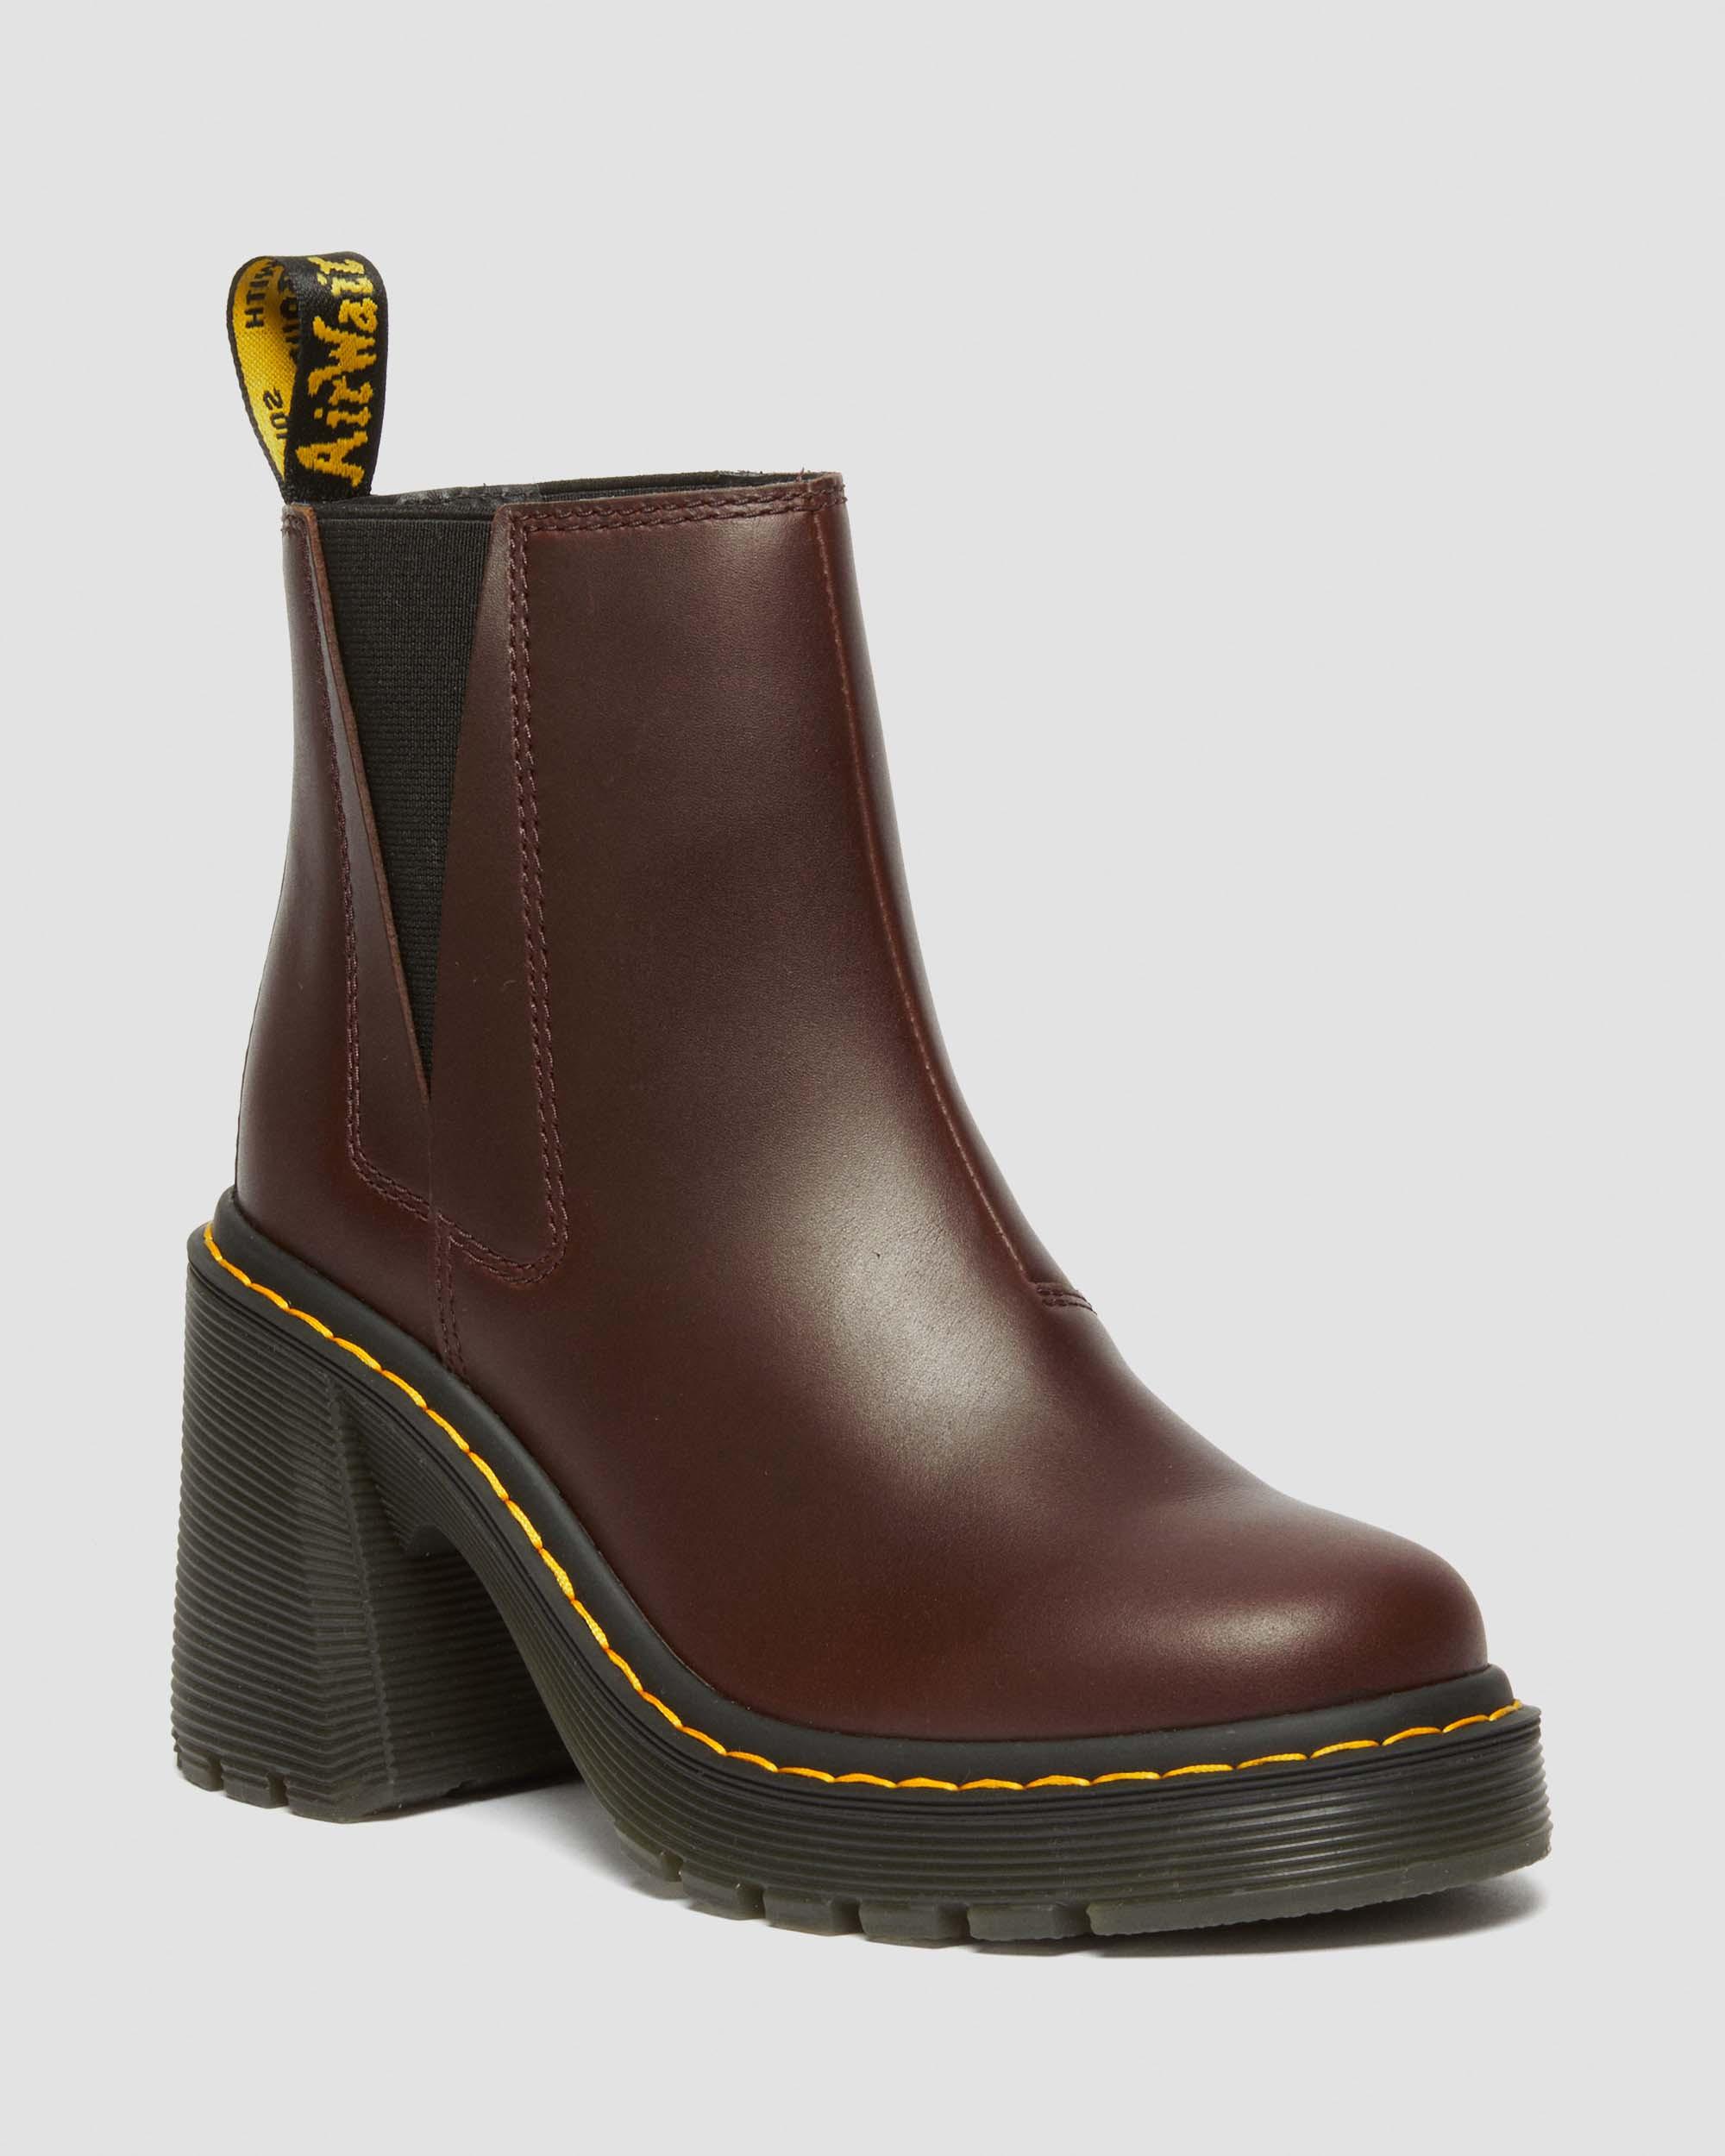 Spence Leather Flared Heel Chelsea Boots in Dark Brown